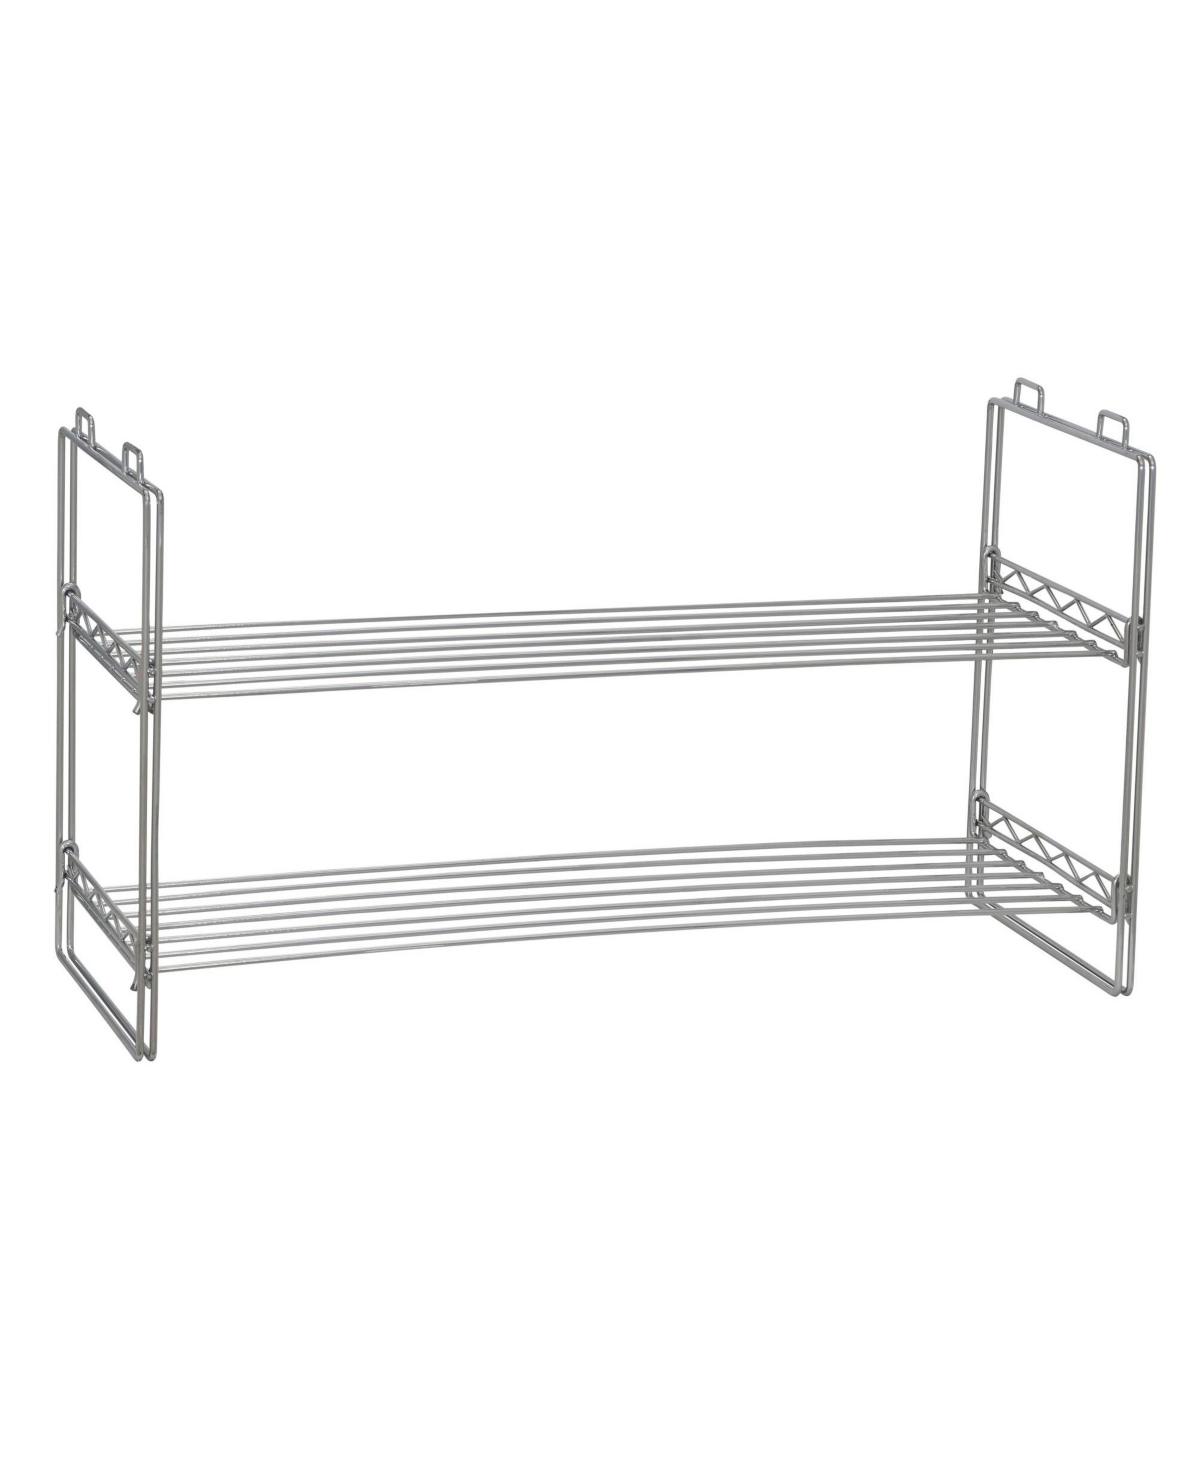 2 Tier Shoe Rack, Stackable Wire Frame, Holds 6 to 8 Pairs of Shoes, Great for Smaller or Larger Footwear, Additional Shelving, Chromelike Finish